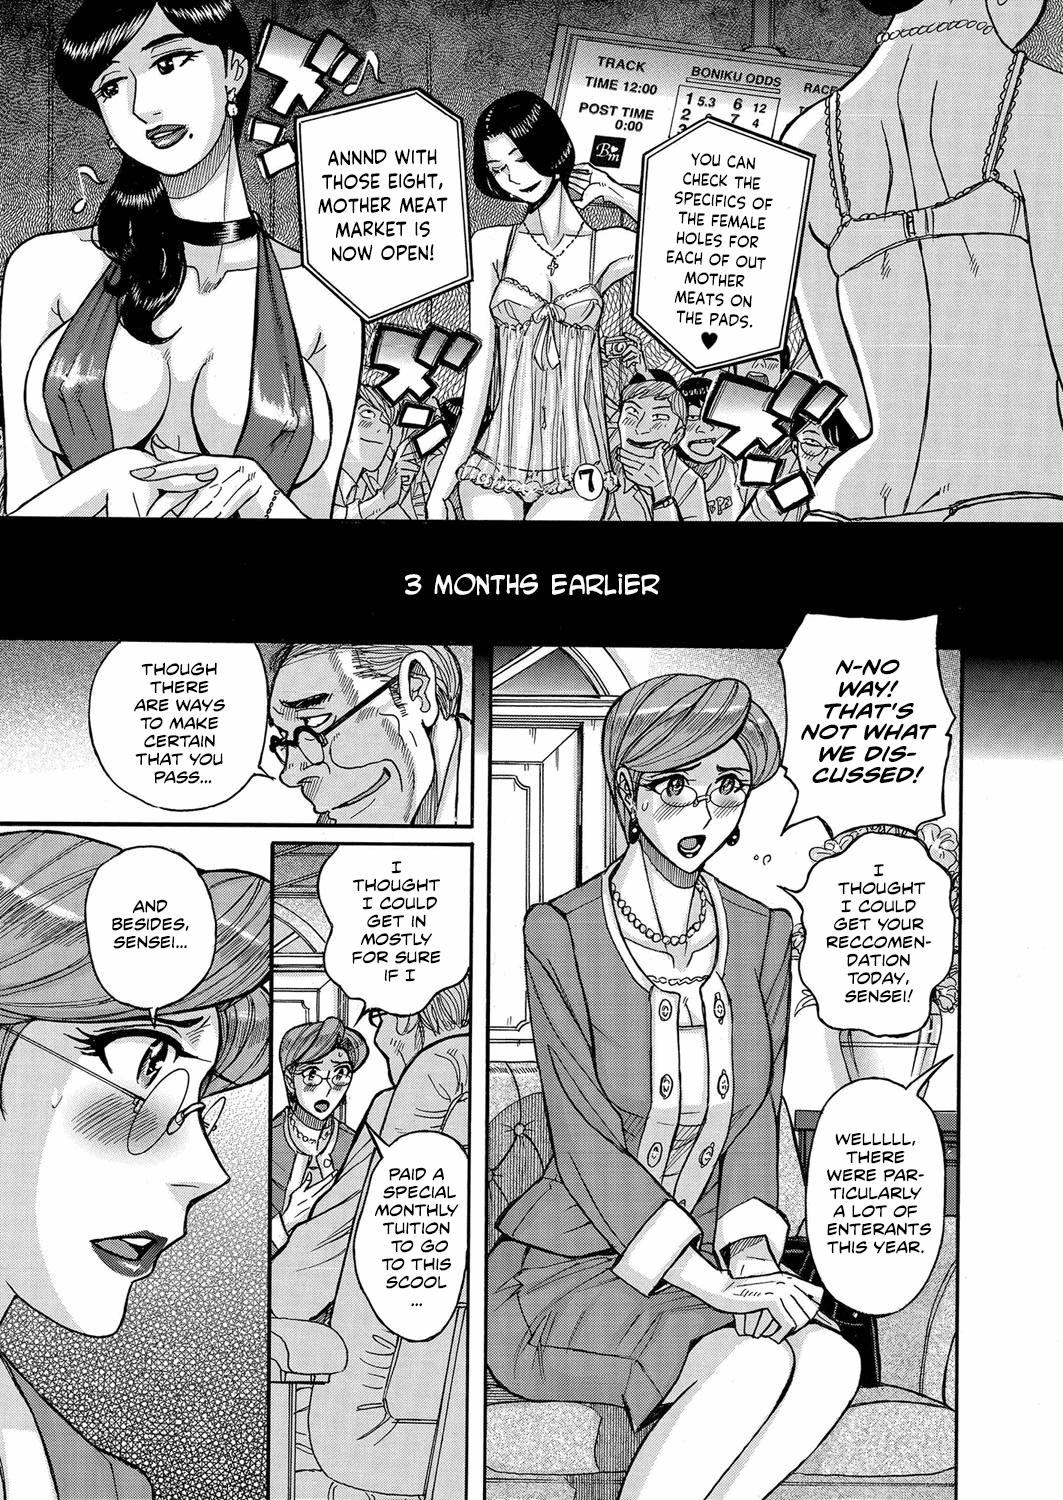 Pure18 Boniku Market | The Mother Meat Market Chacal - Page 3